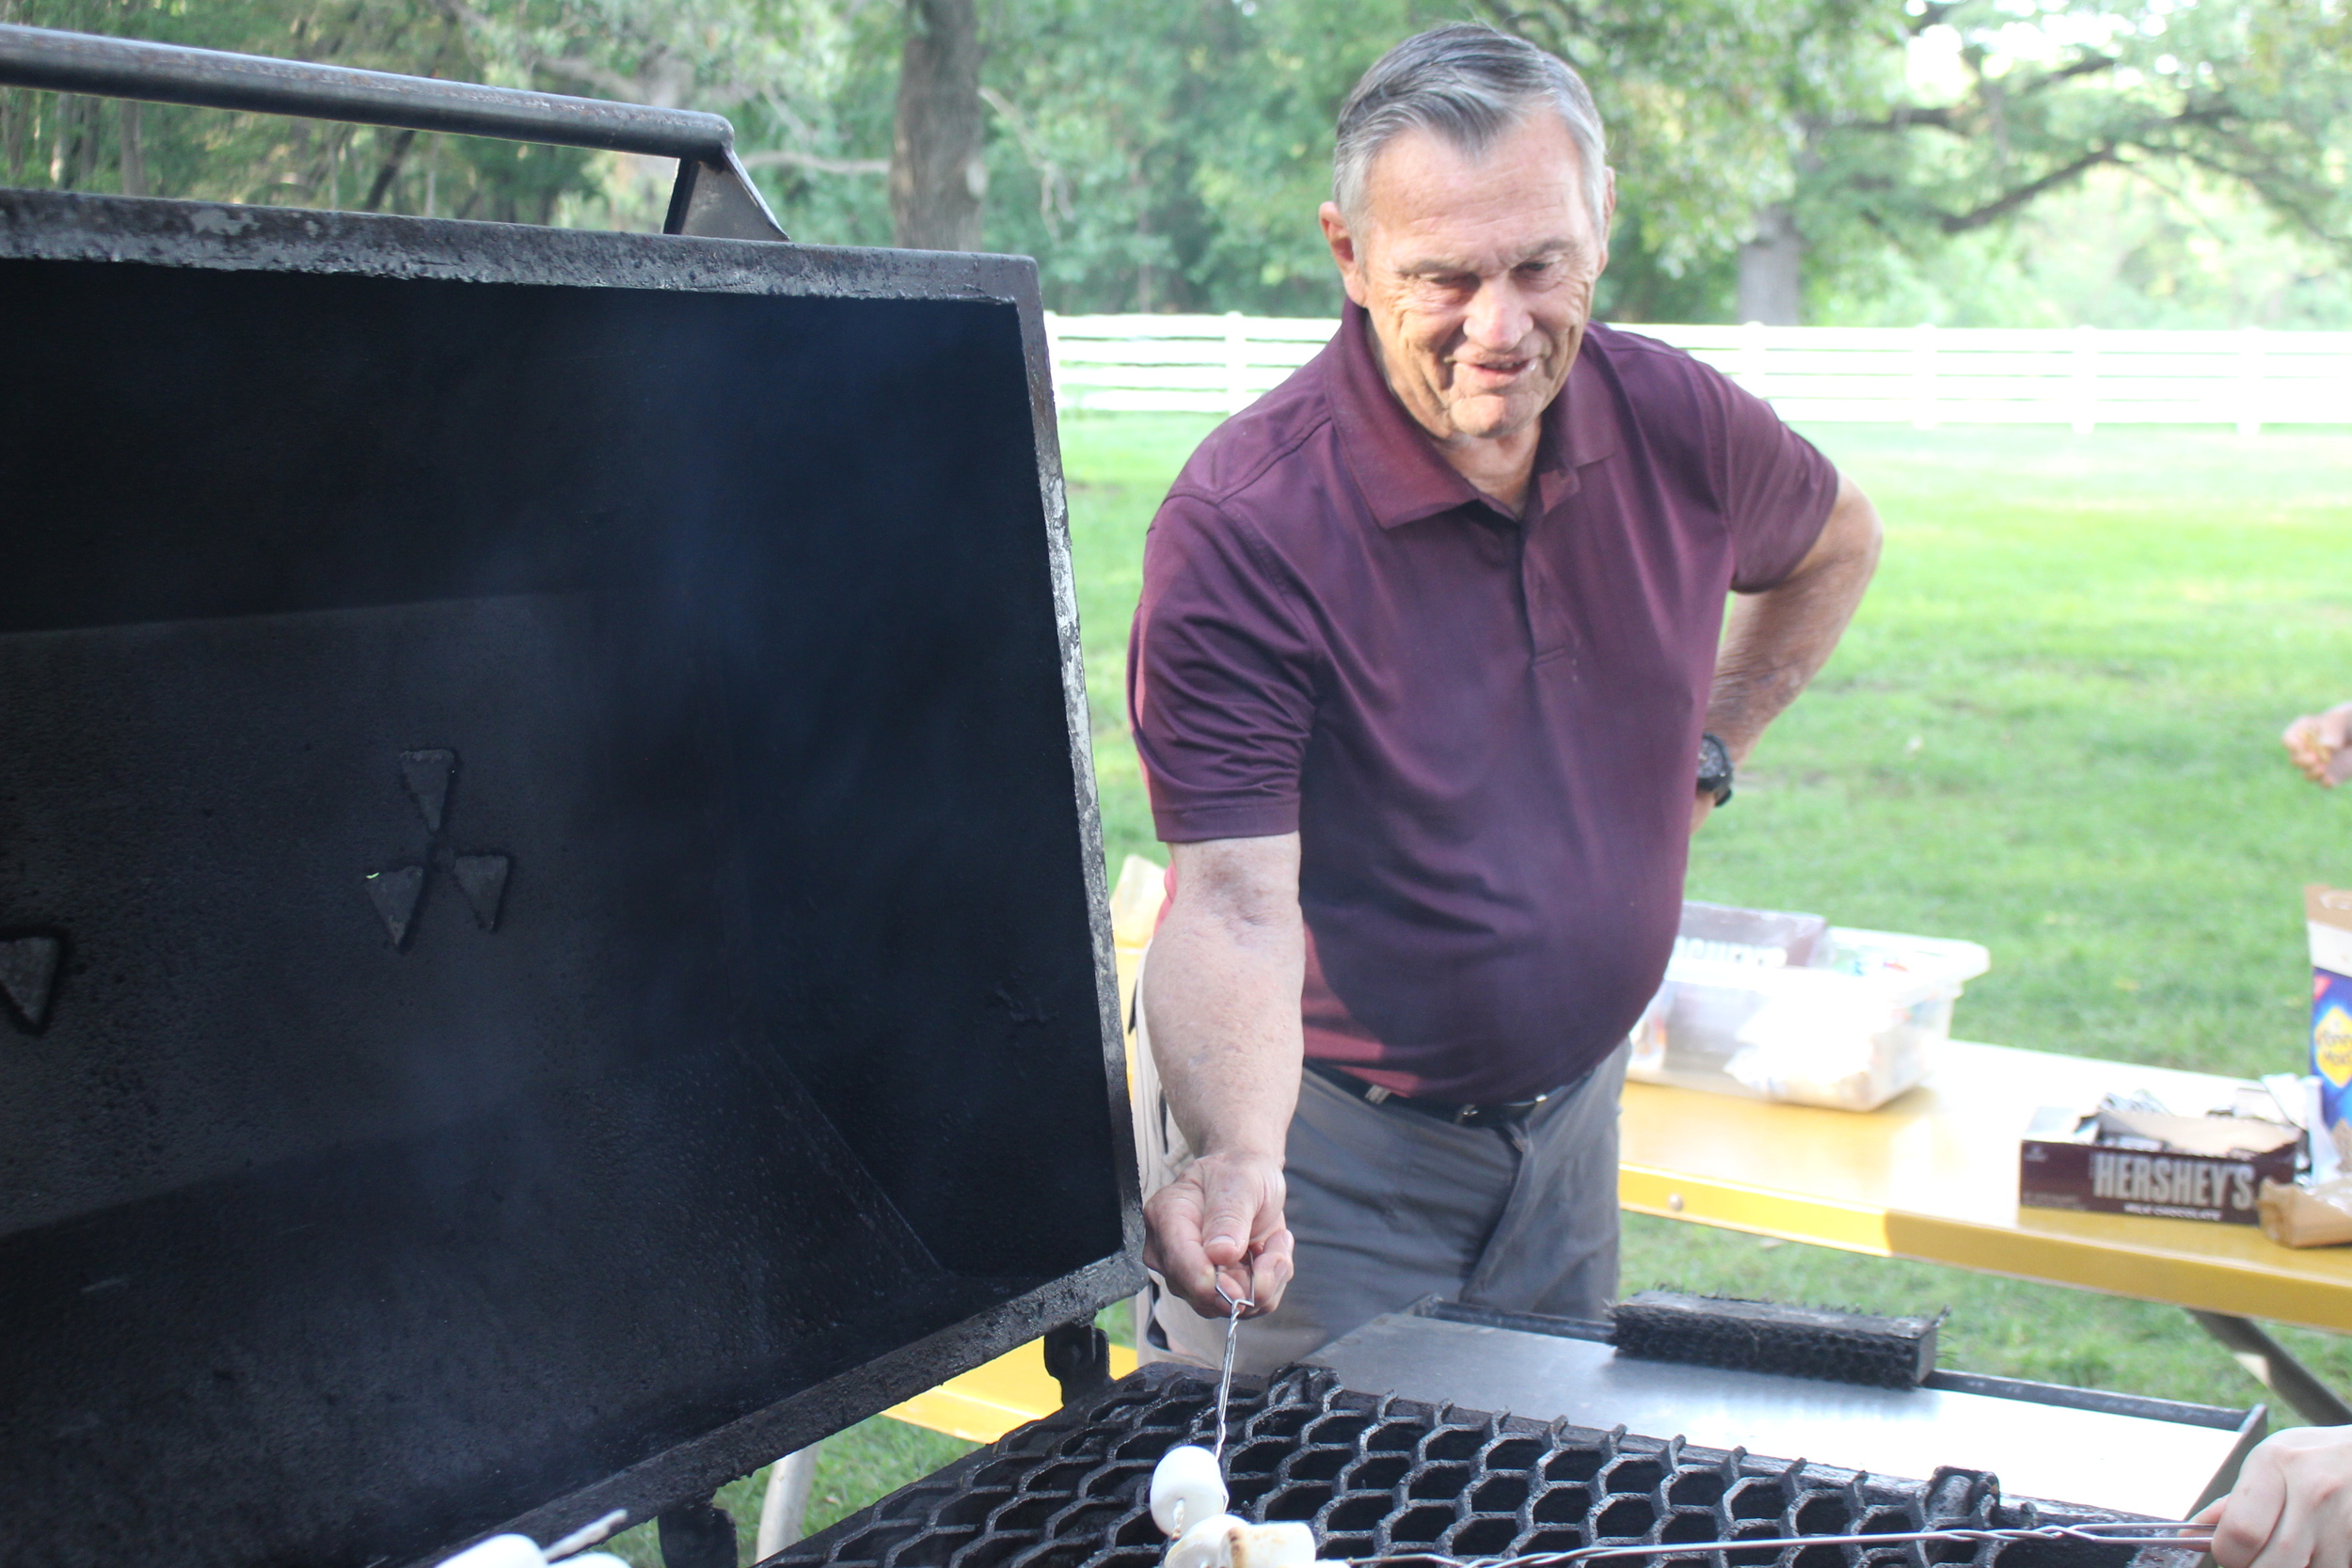 Dick Corwine shows us how to make a s'more